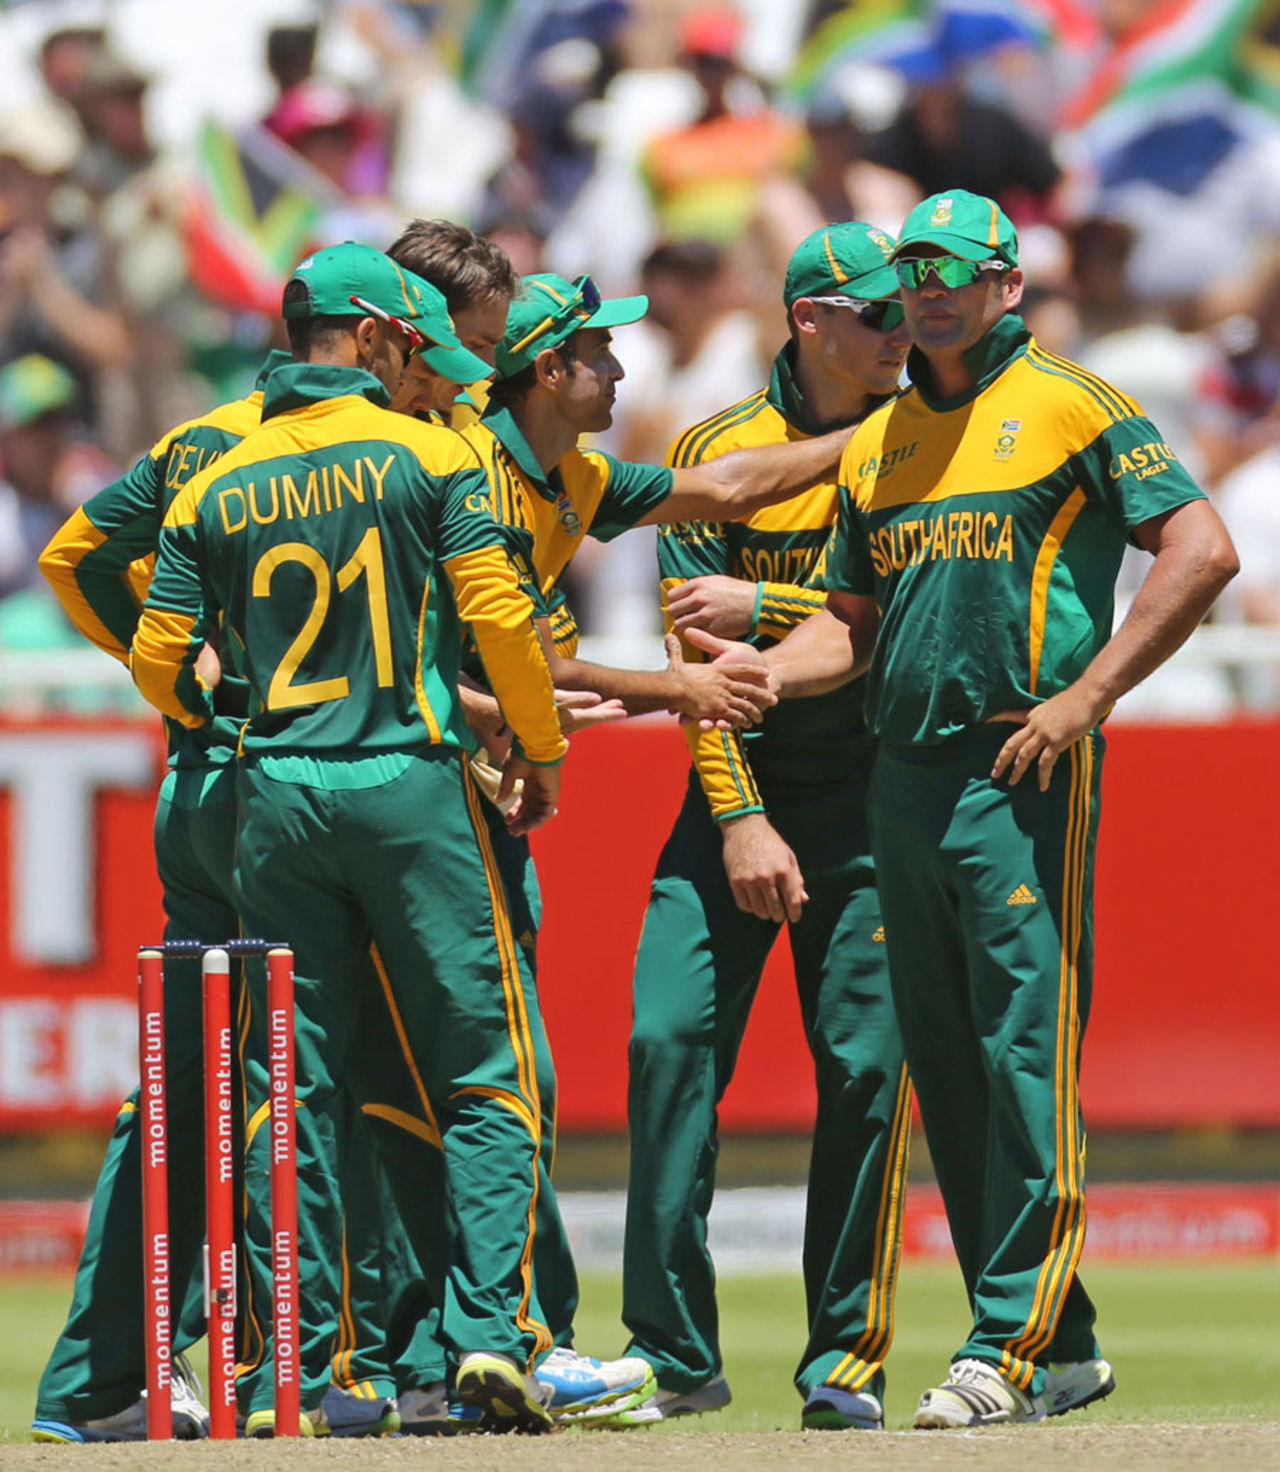 The South African players celebrate the wicket of Nasir Jamshed, South Africa v Pakistan, 1st ODI, Cape Town, November 24, 2013